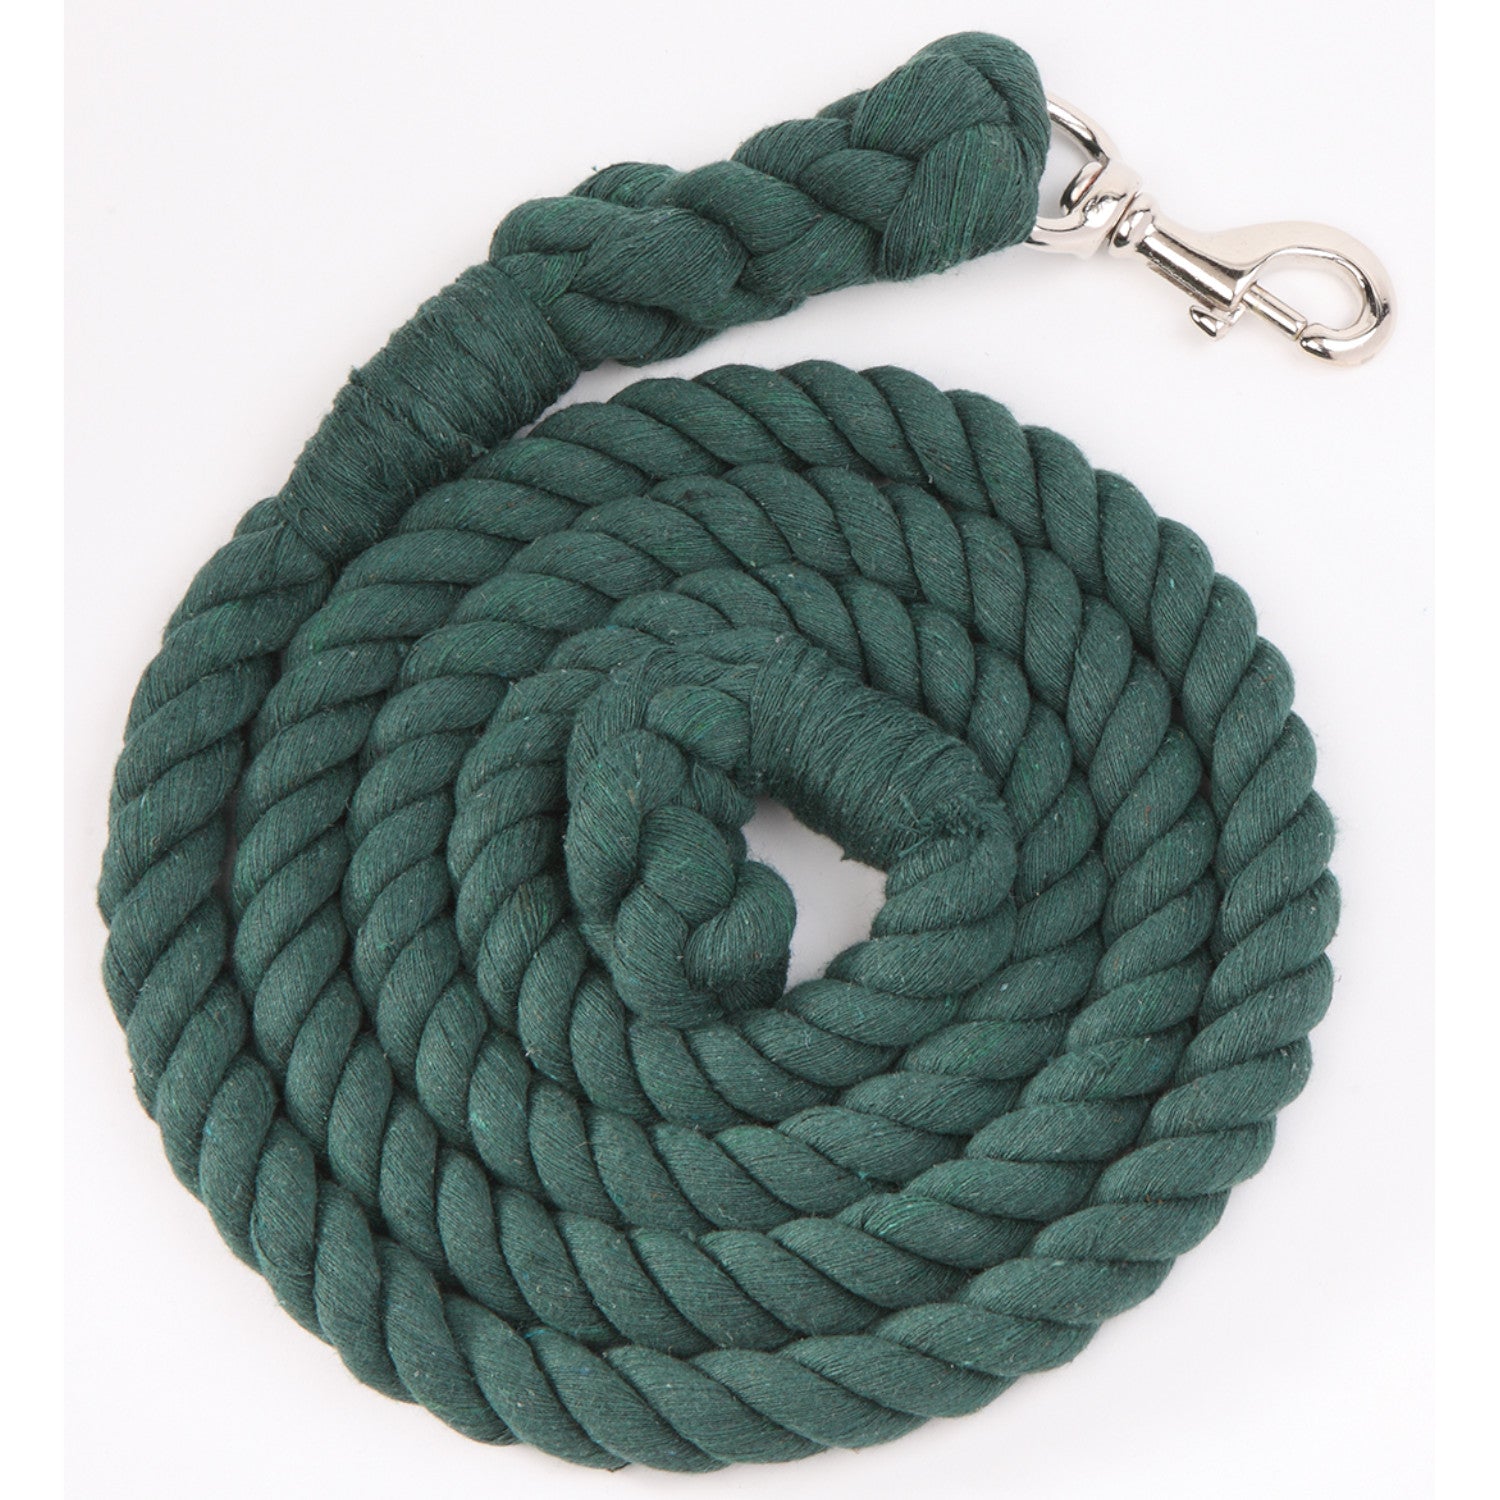 Cotton Rope Lead - Nickel Plated Snap